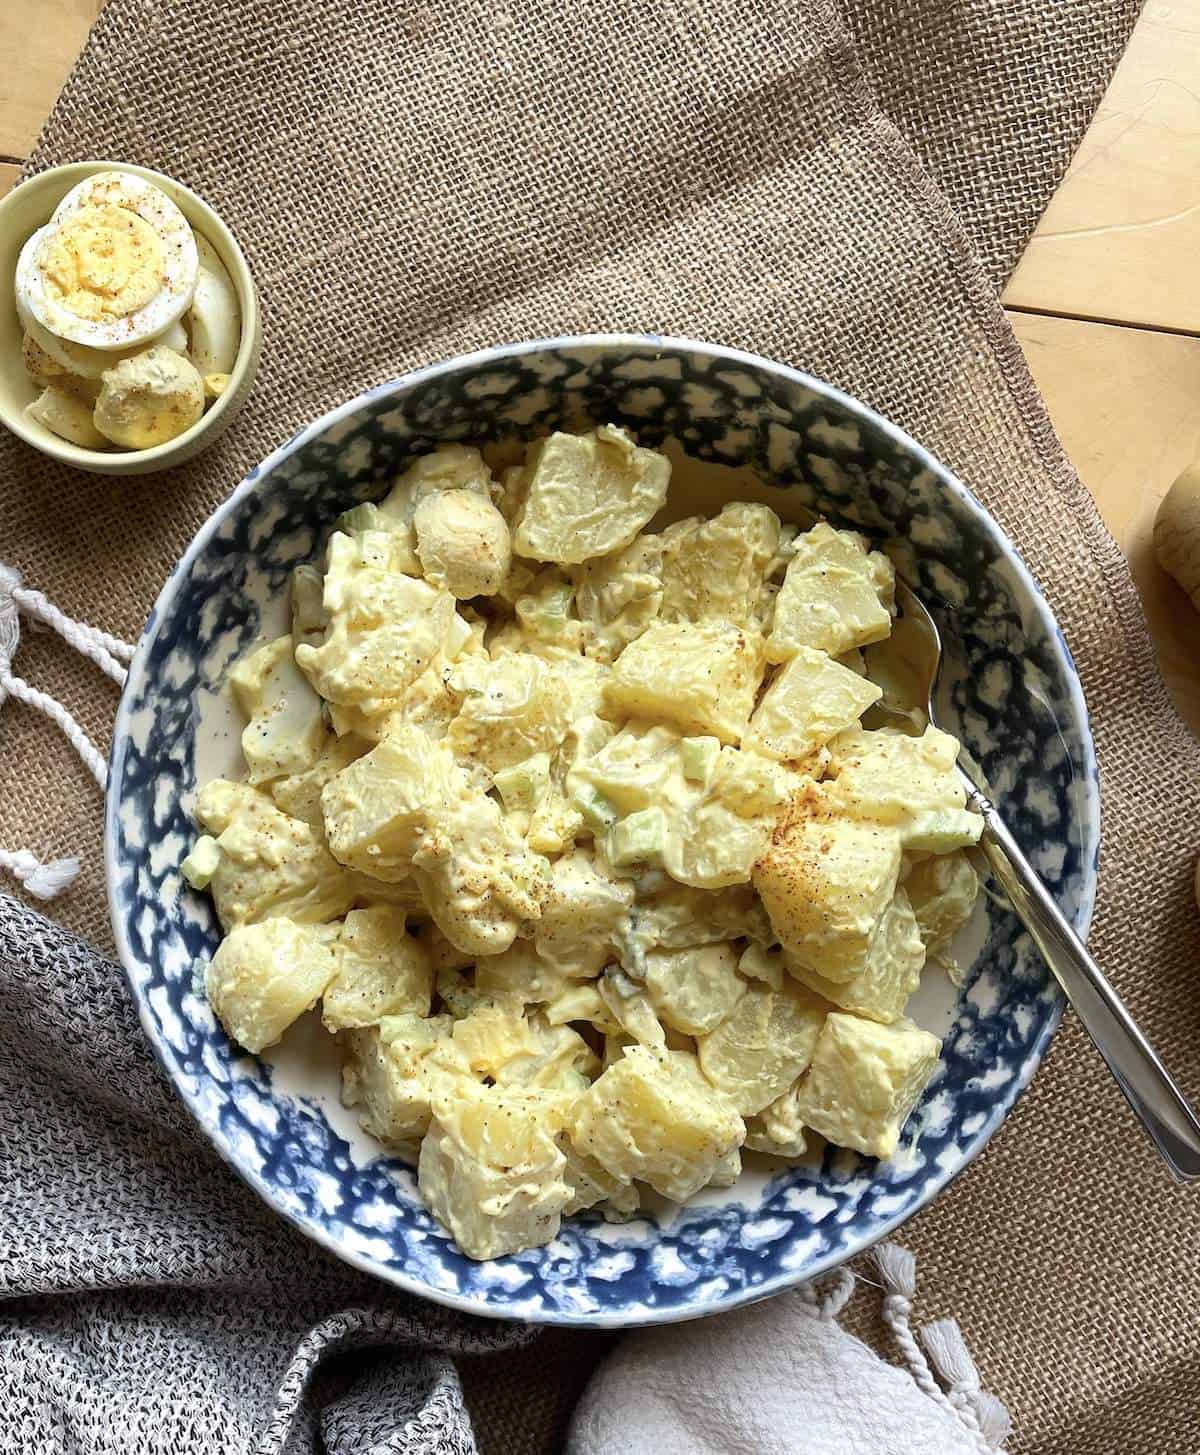 A bowl of southern potato salad with mustard dressing and hard-boiled eggs on the side.